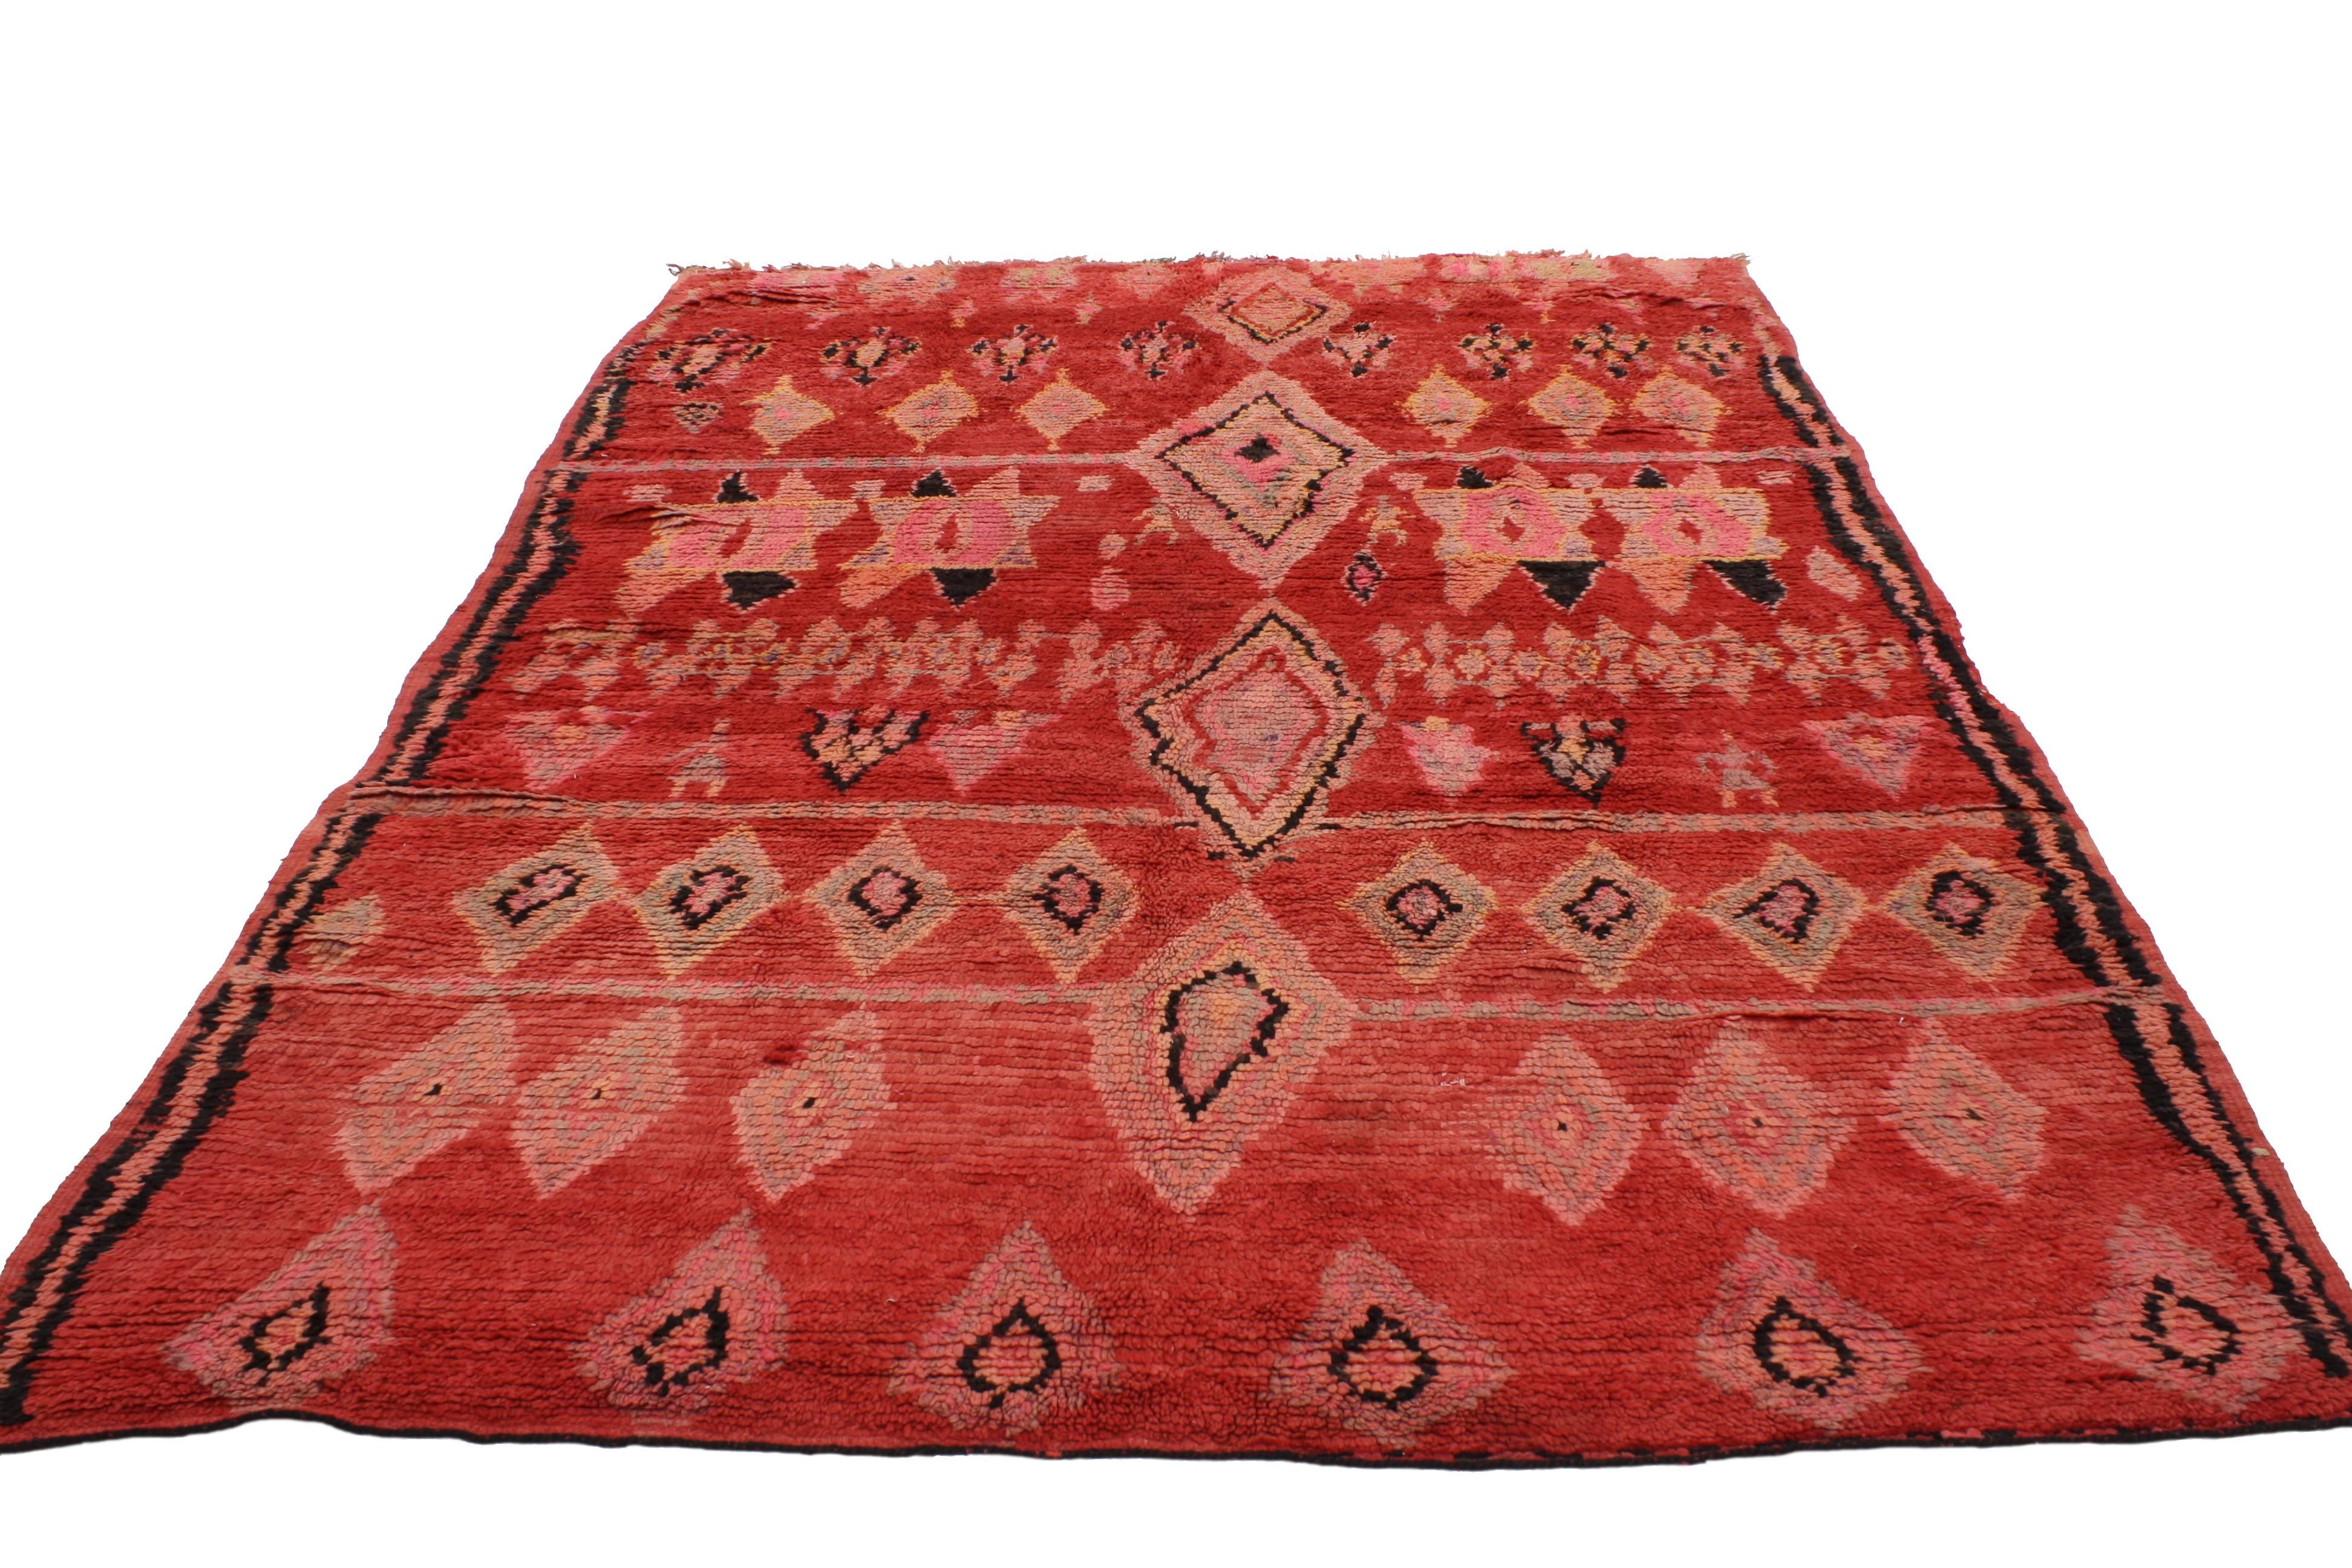 Hand-Knotted Vintage Berber Red Moroccan Rug with Modern Tribal Design and Star of Solomon